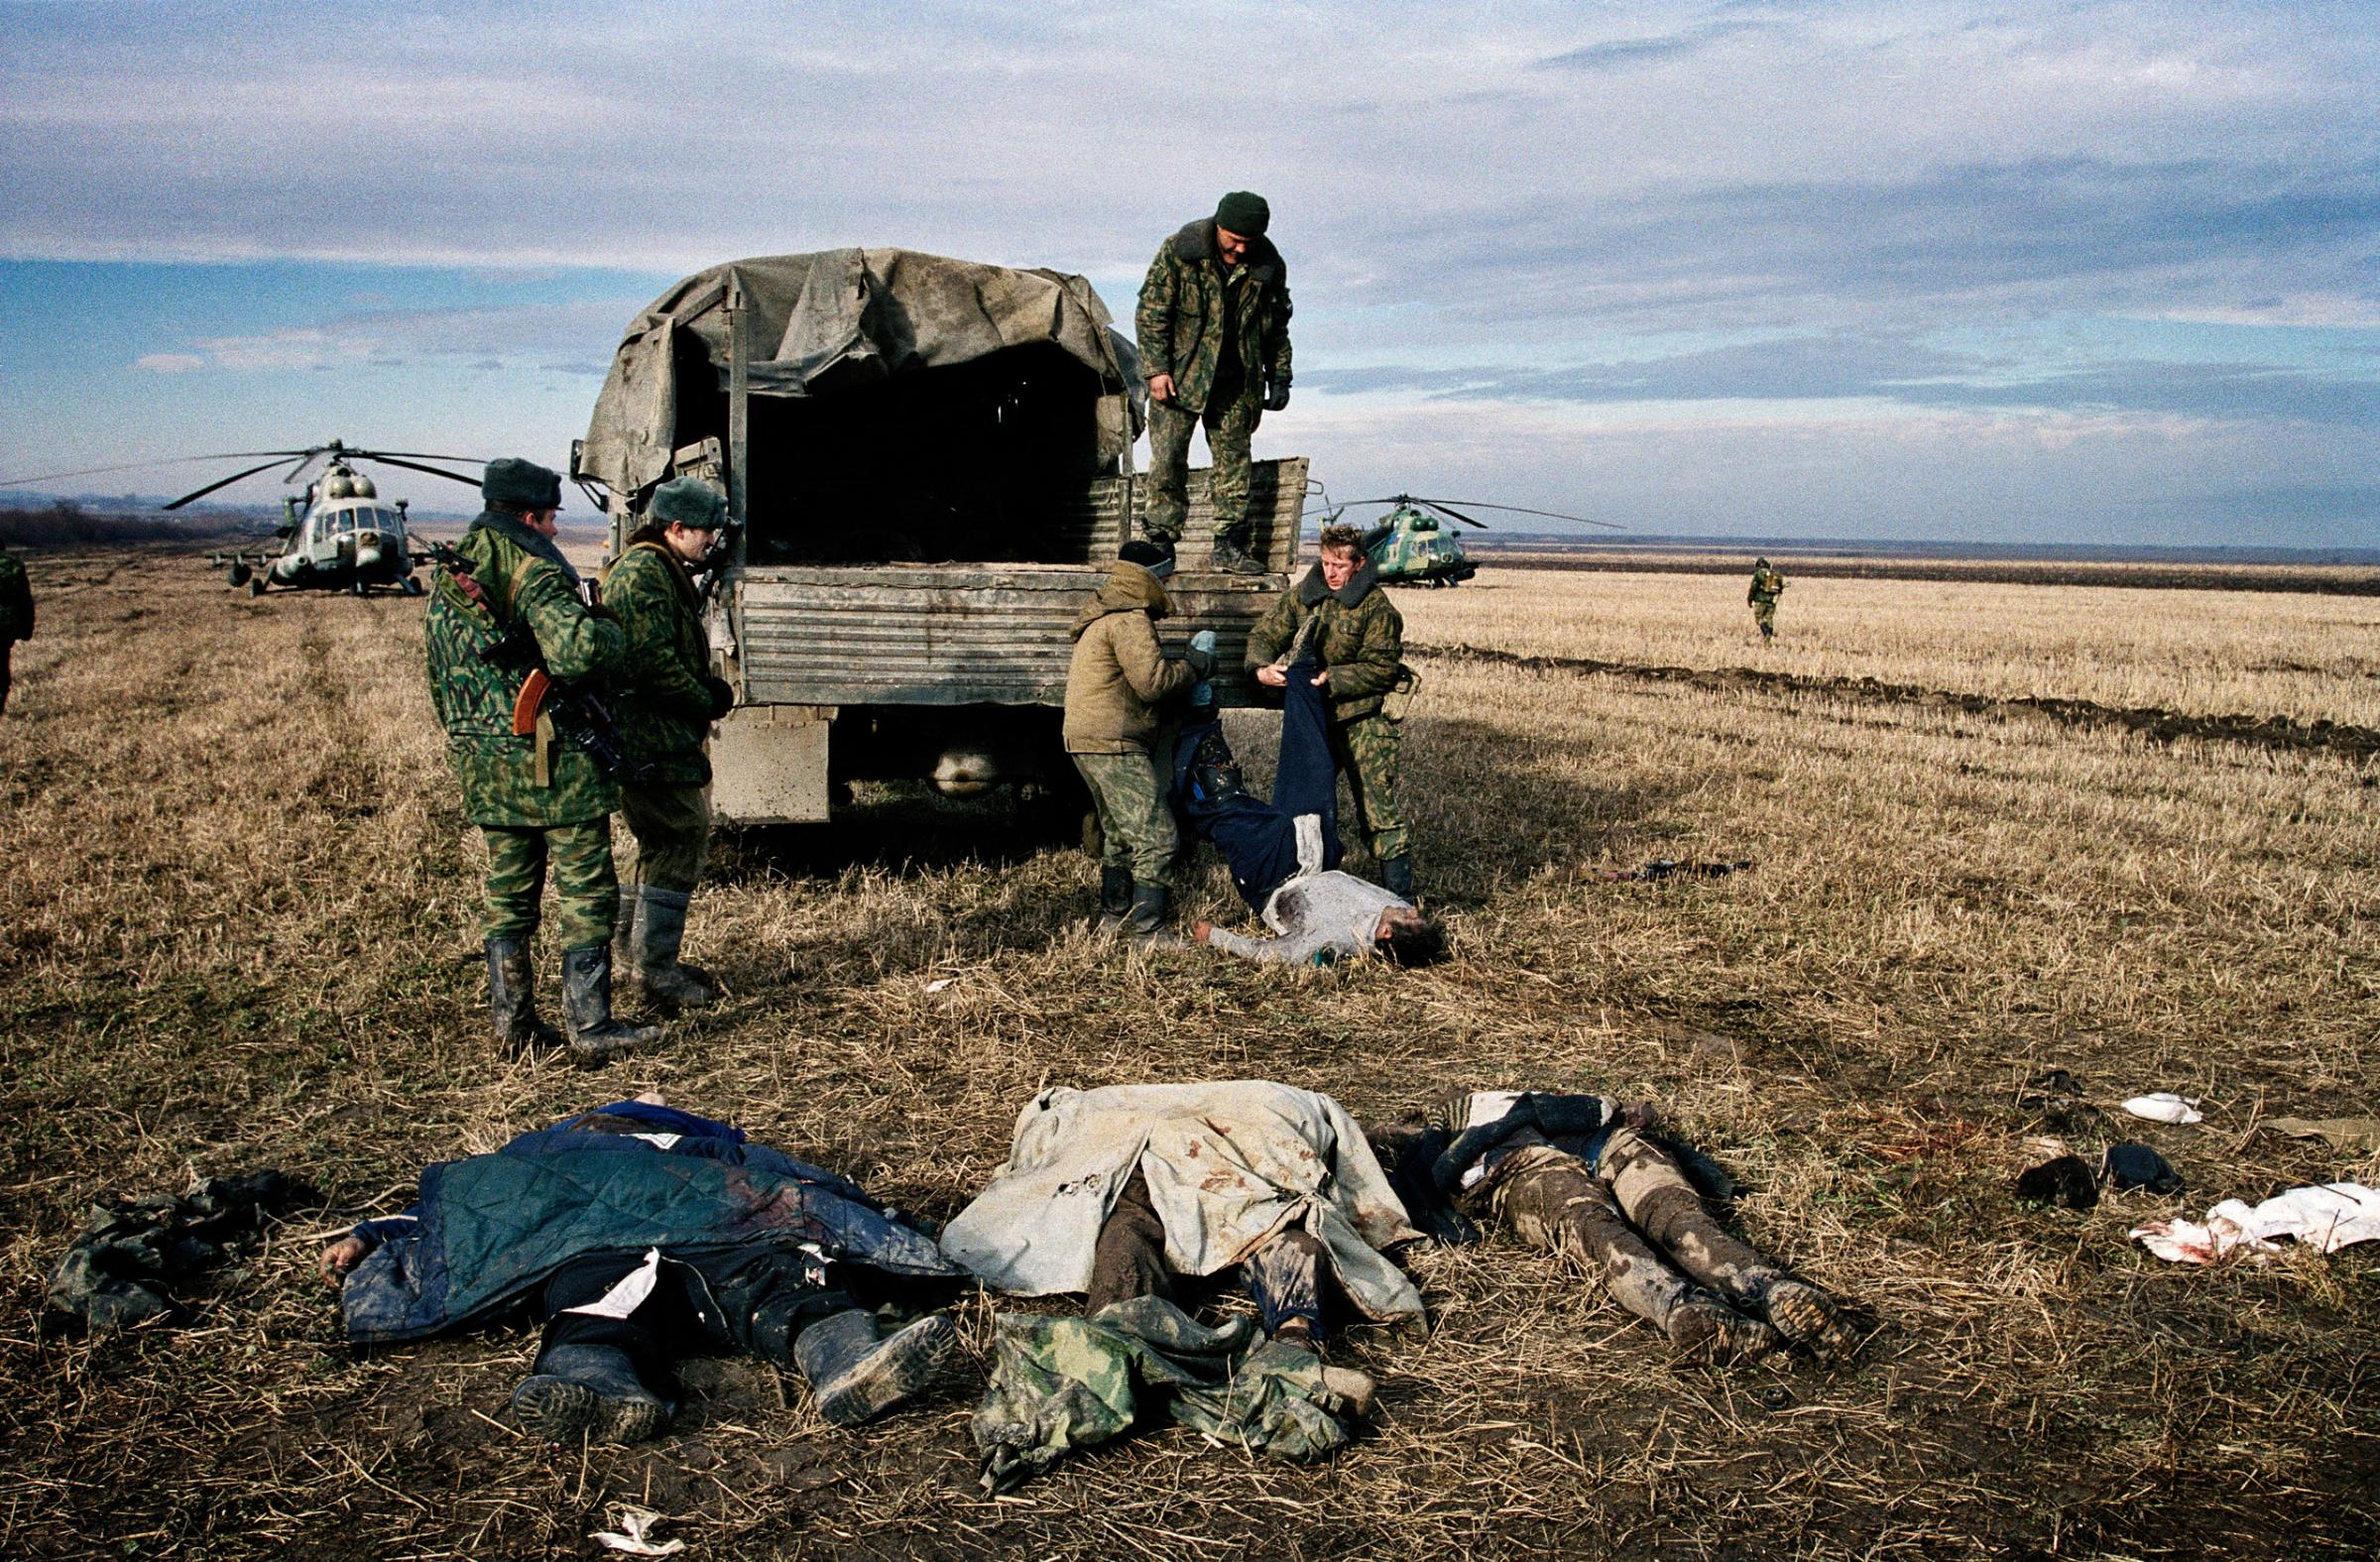 Russian troops entered Chechnya in October 1999. By the beginning of December 1999, the Russians had surrounded the capital Grozny, which they stormed on December 25,1999, killing tens of thousands in the process. Yuri kozyrev—NOOR